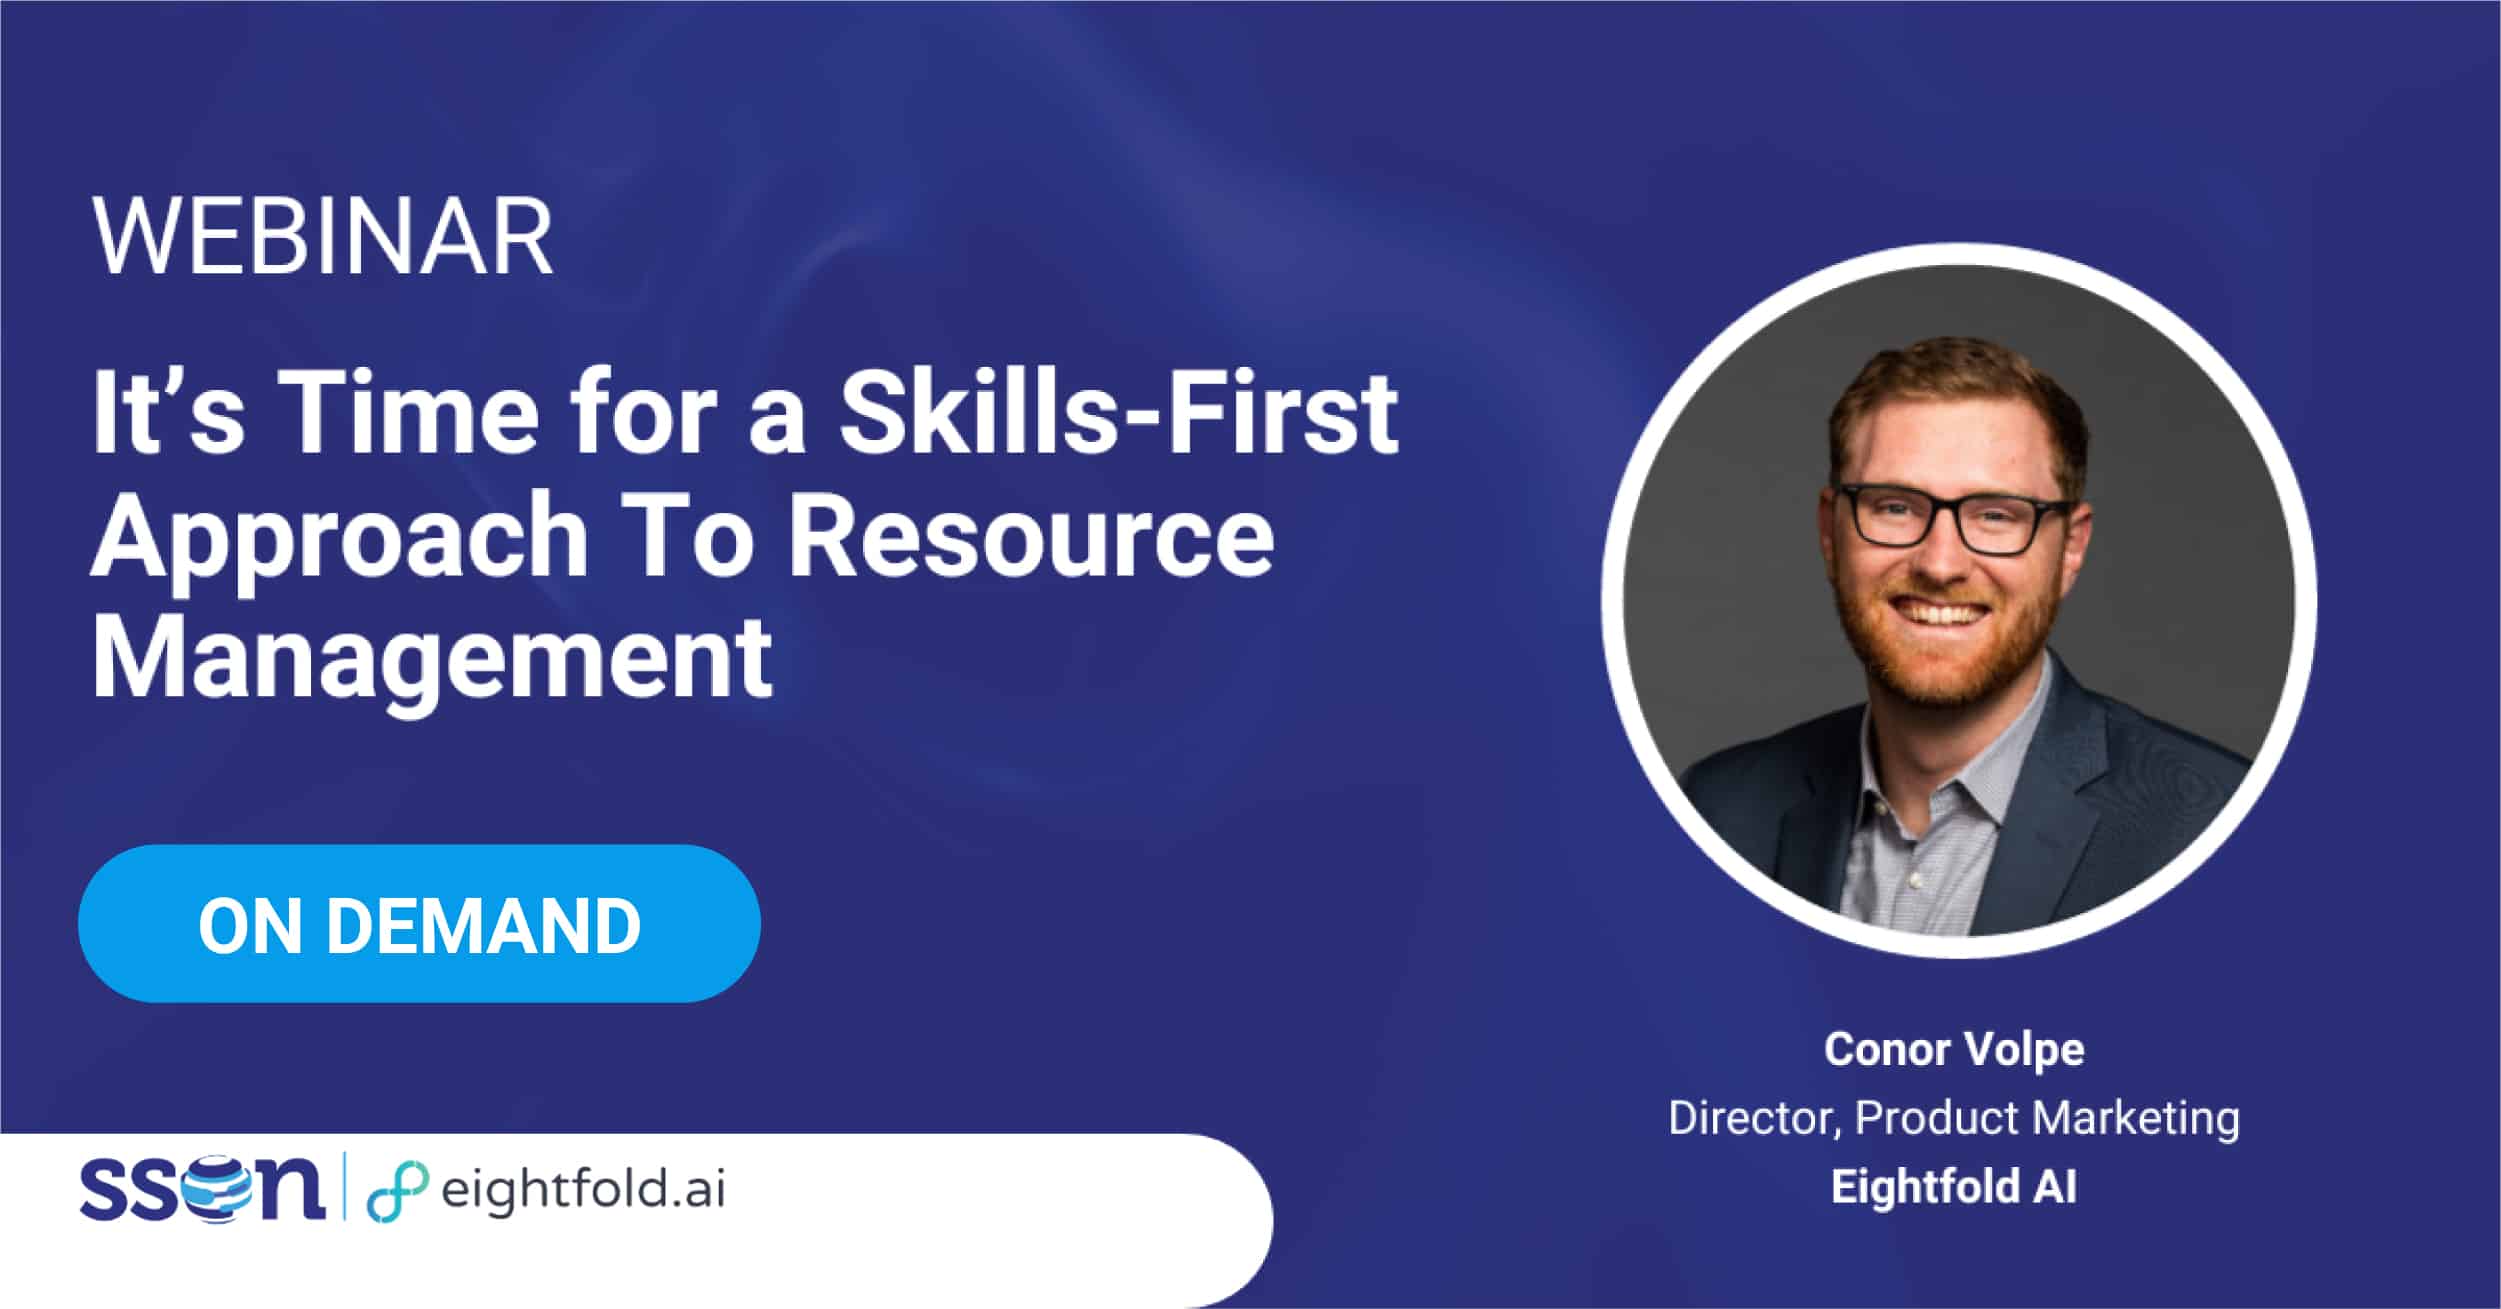 It’s time for a skills-first approach to resource management